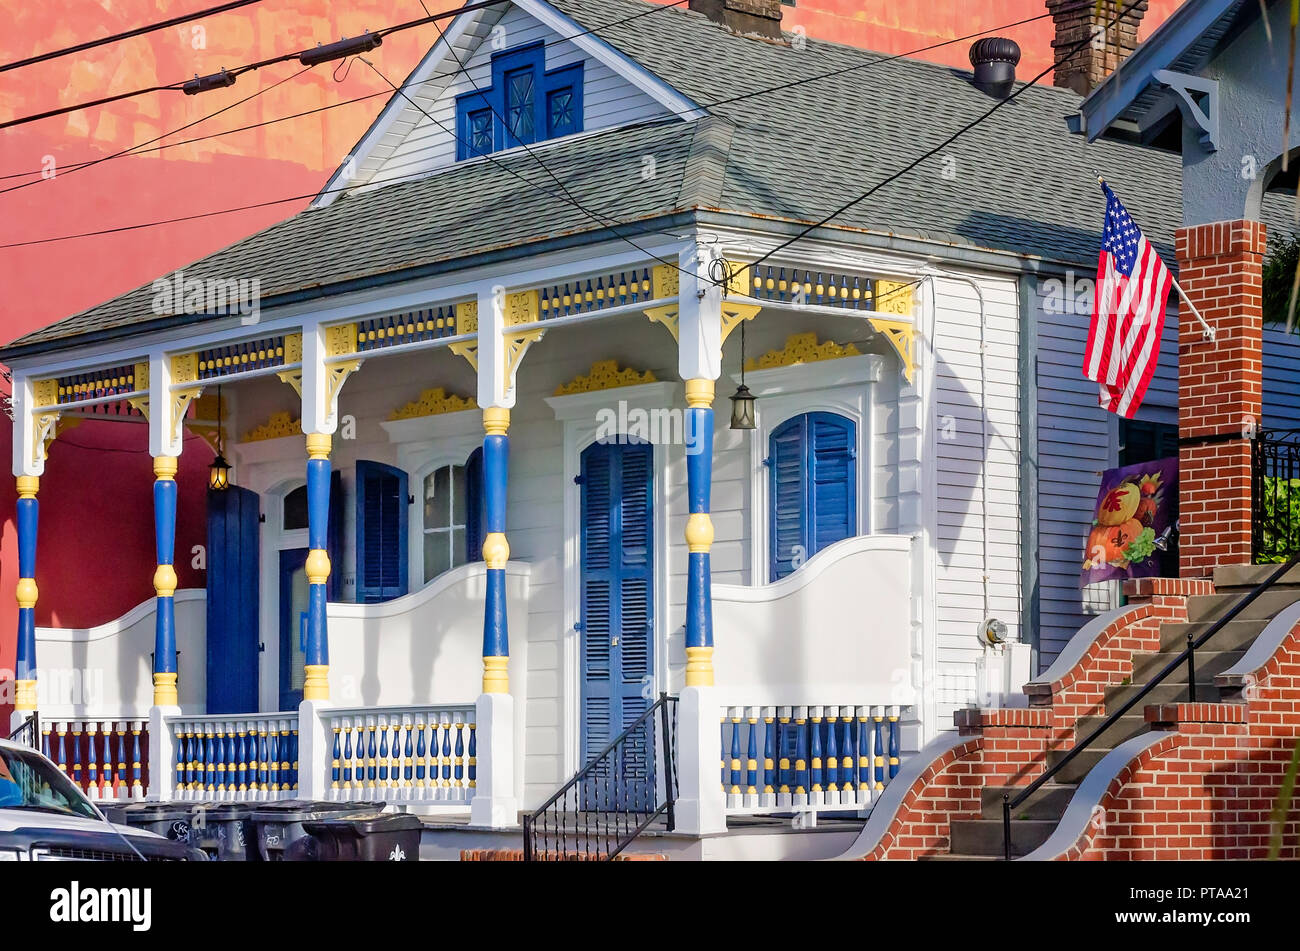 A blue and yellow color scheme accents a “double shotgun” house in the French Quarter, Nov. 15, 2015, in New Orleans, Louisiana. Stock Photo